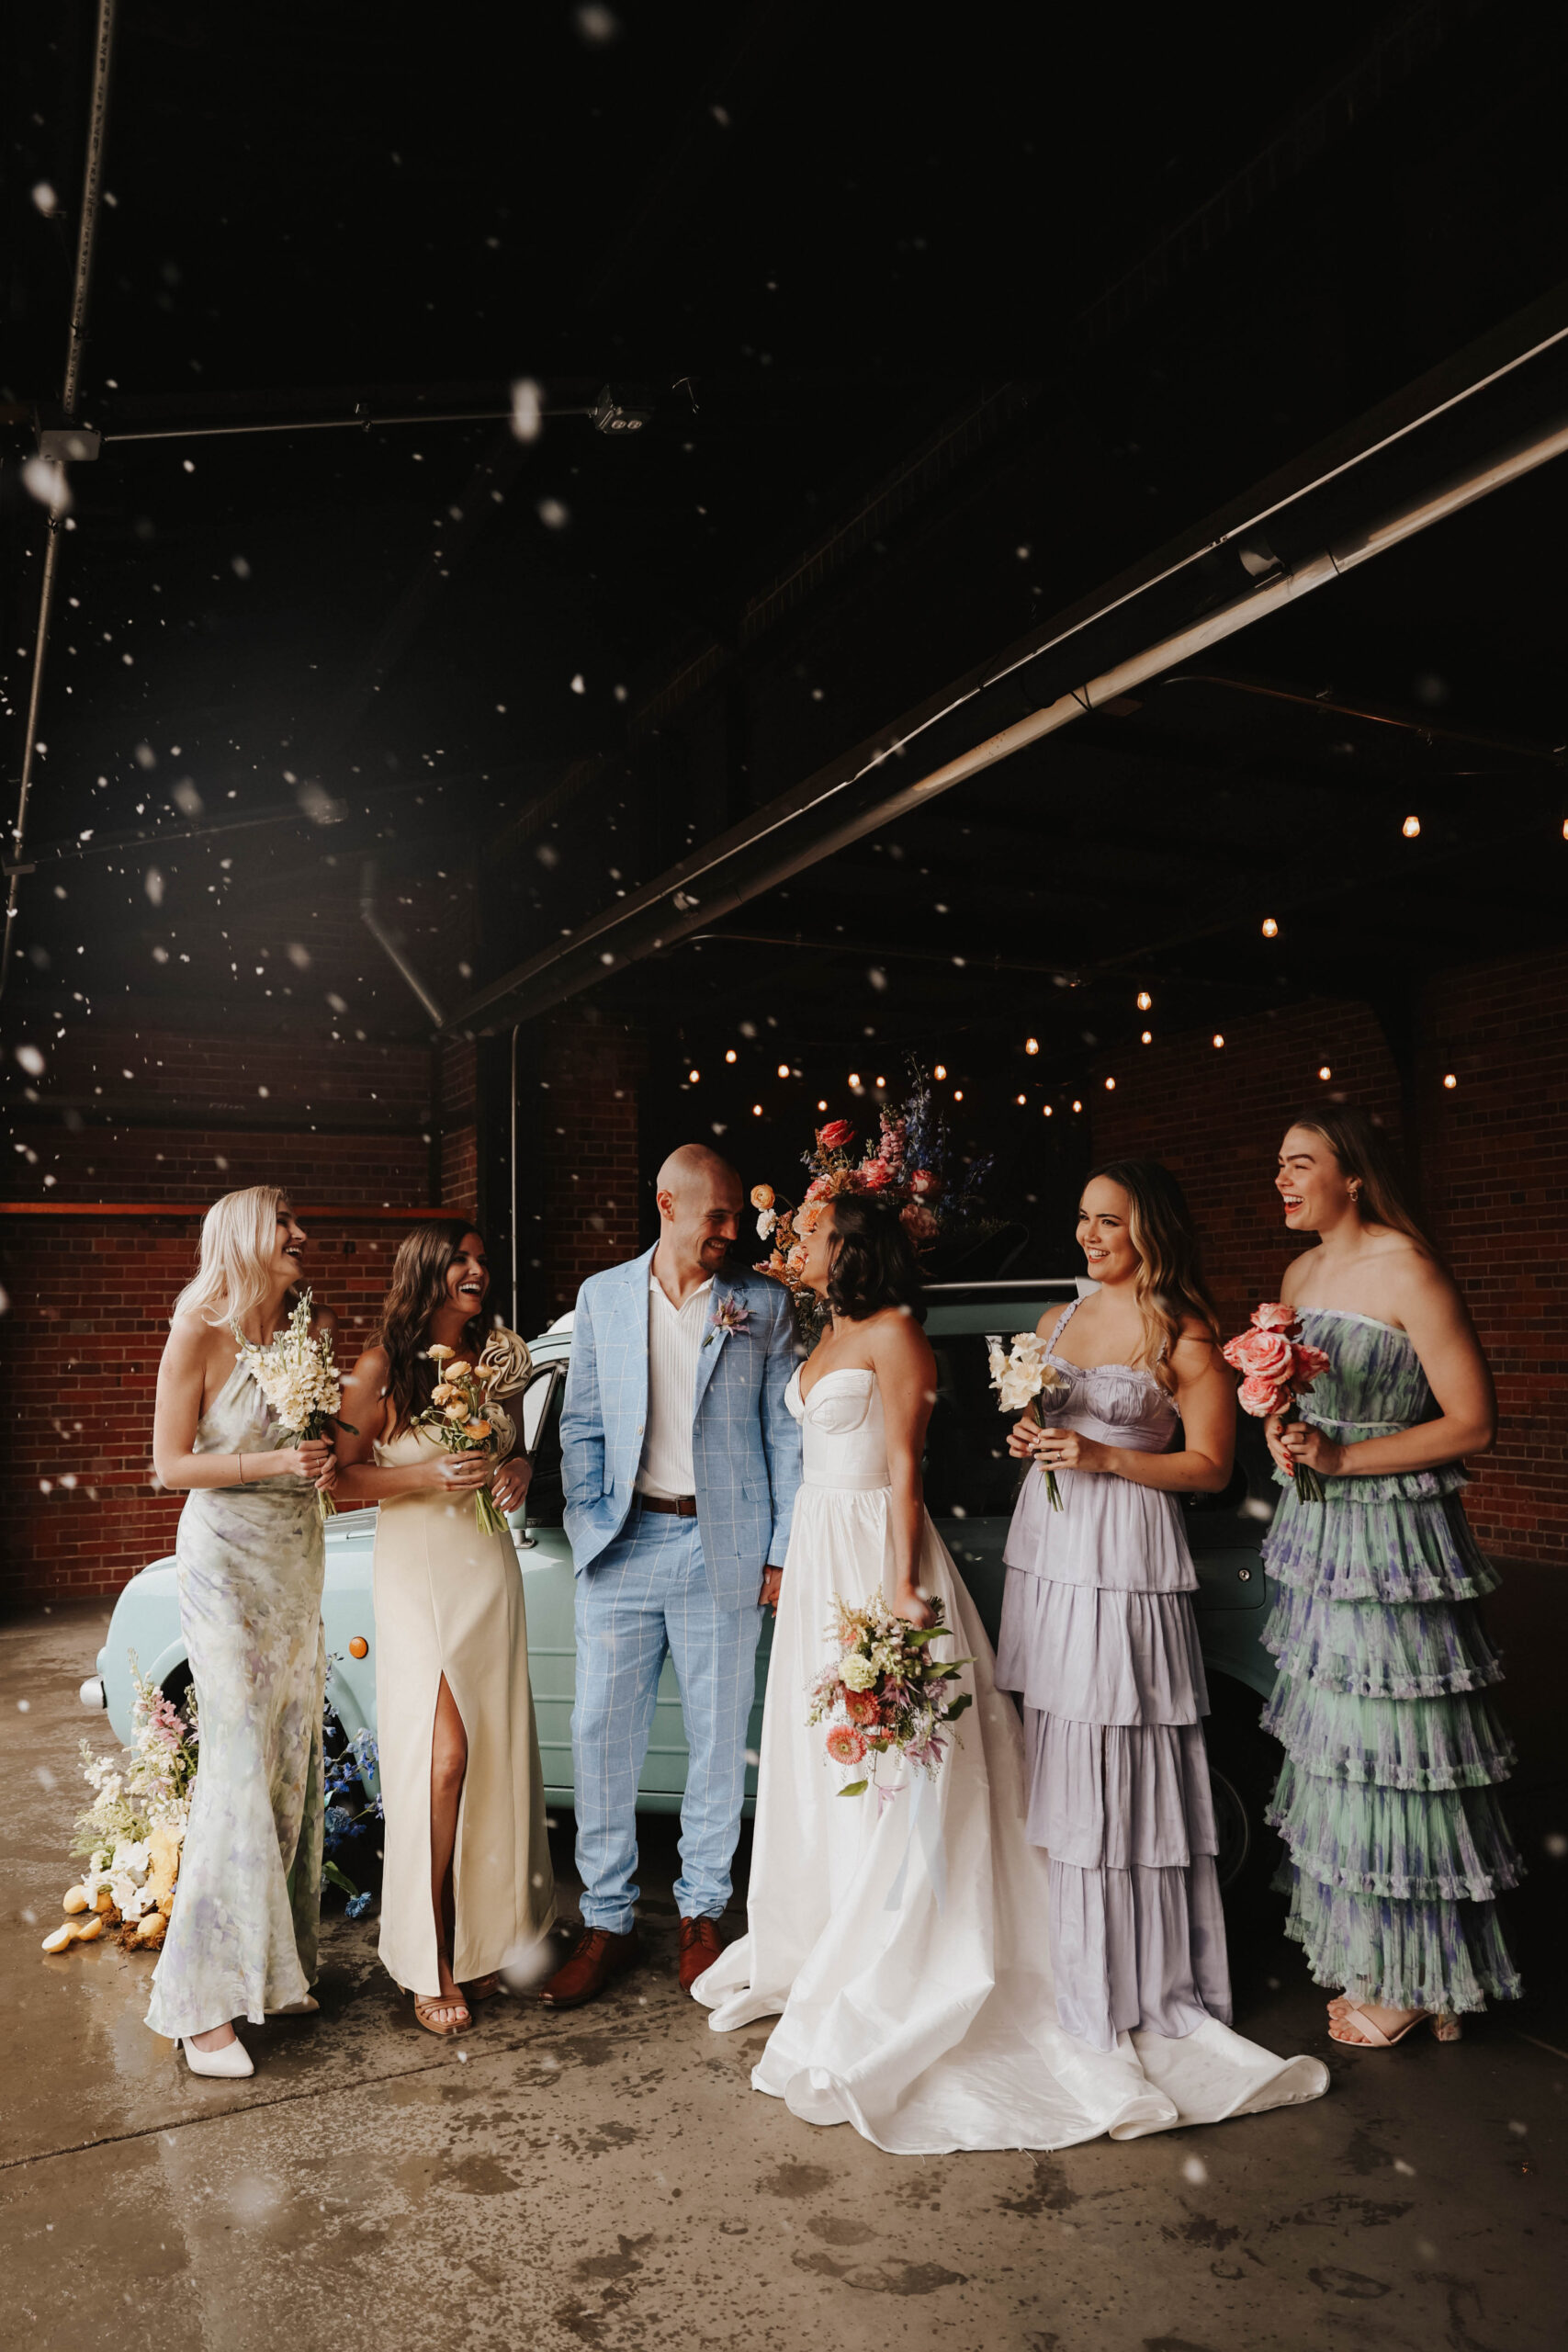 snow falling while the bride and groom pose with the bridesmaids during a colorful spring wedding 